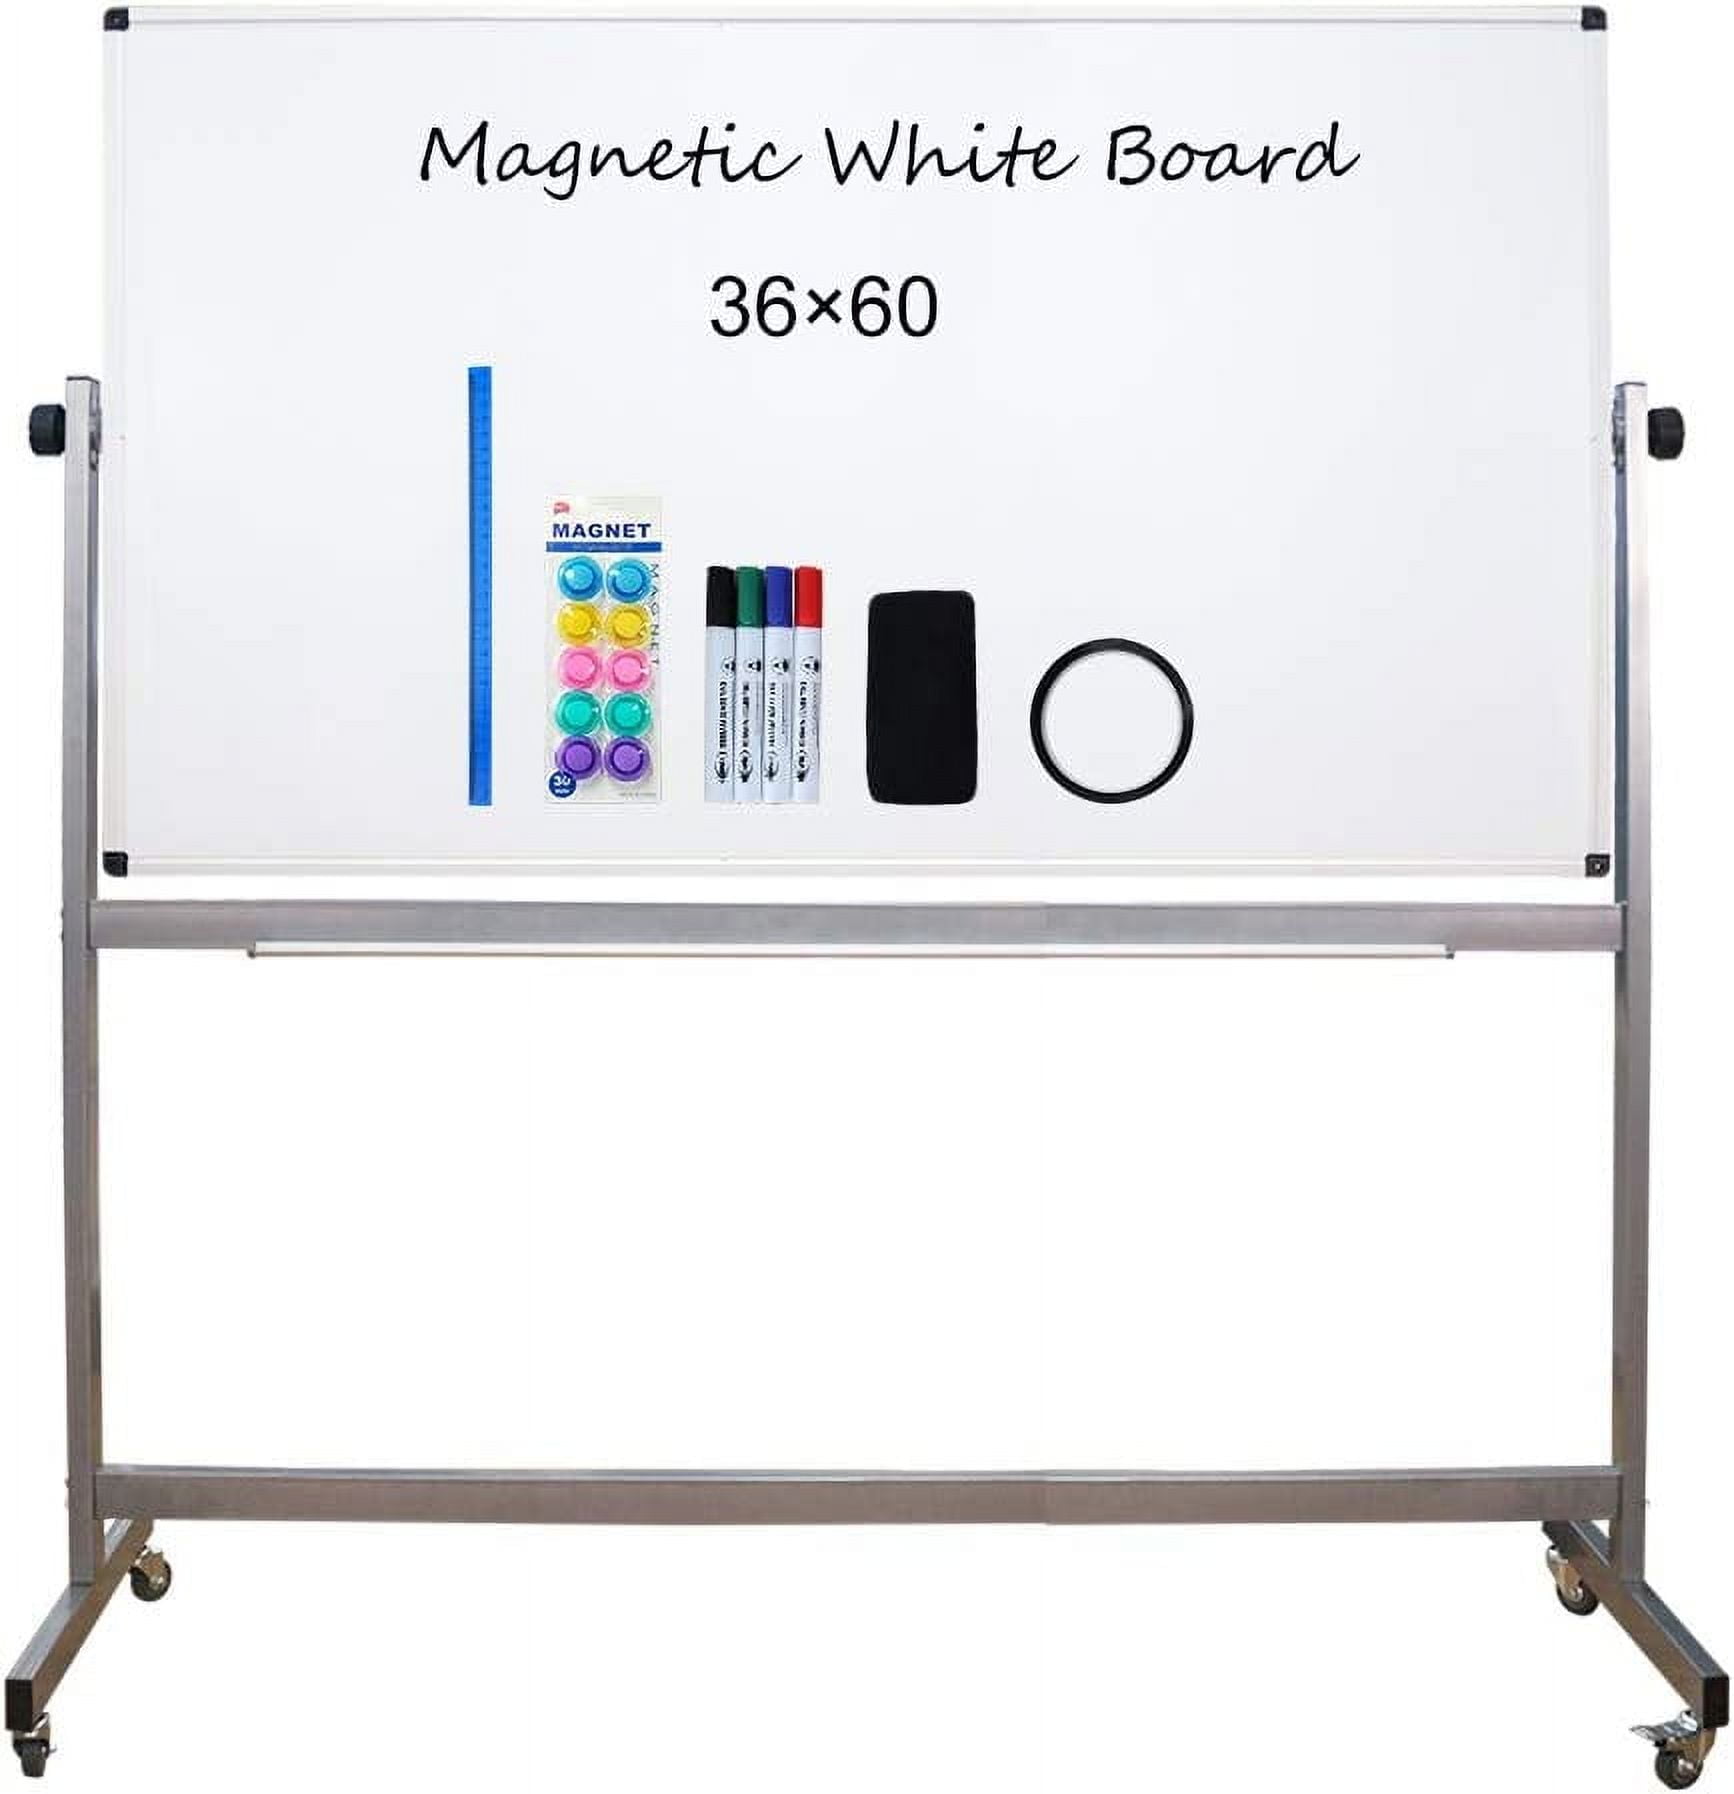 XIWODE Magnetic Dry Erase Board, Wall Mounted Whiteboard, 90 x 60 cm, Lightweight White Board, Wall Mounted Board for Kids, Home, Office, School